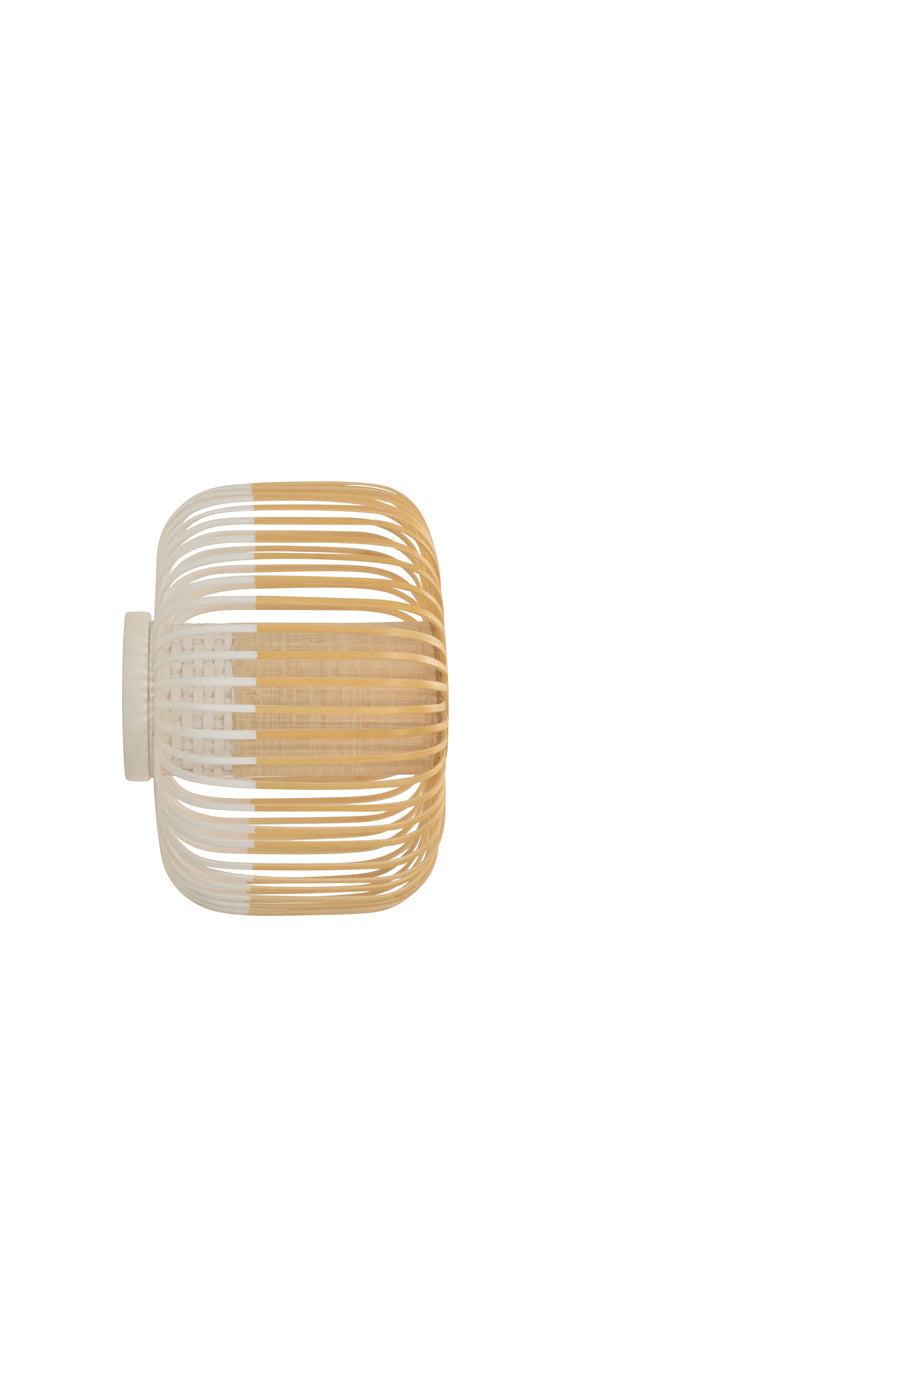 Bamboo Wall/Ceiling Light Small by Forestier